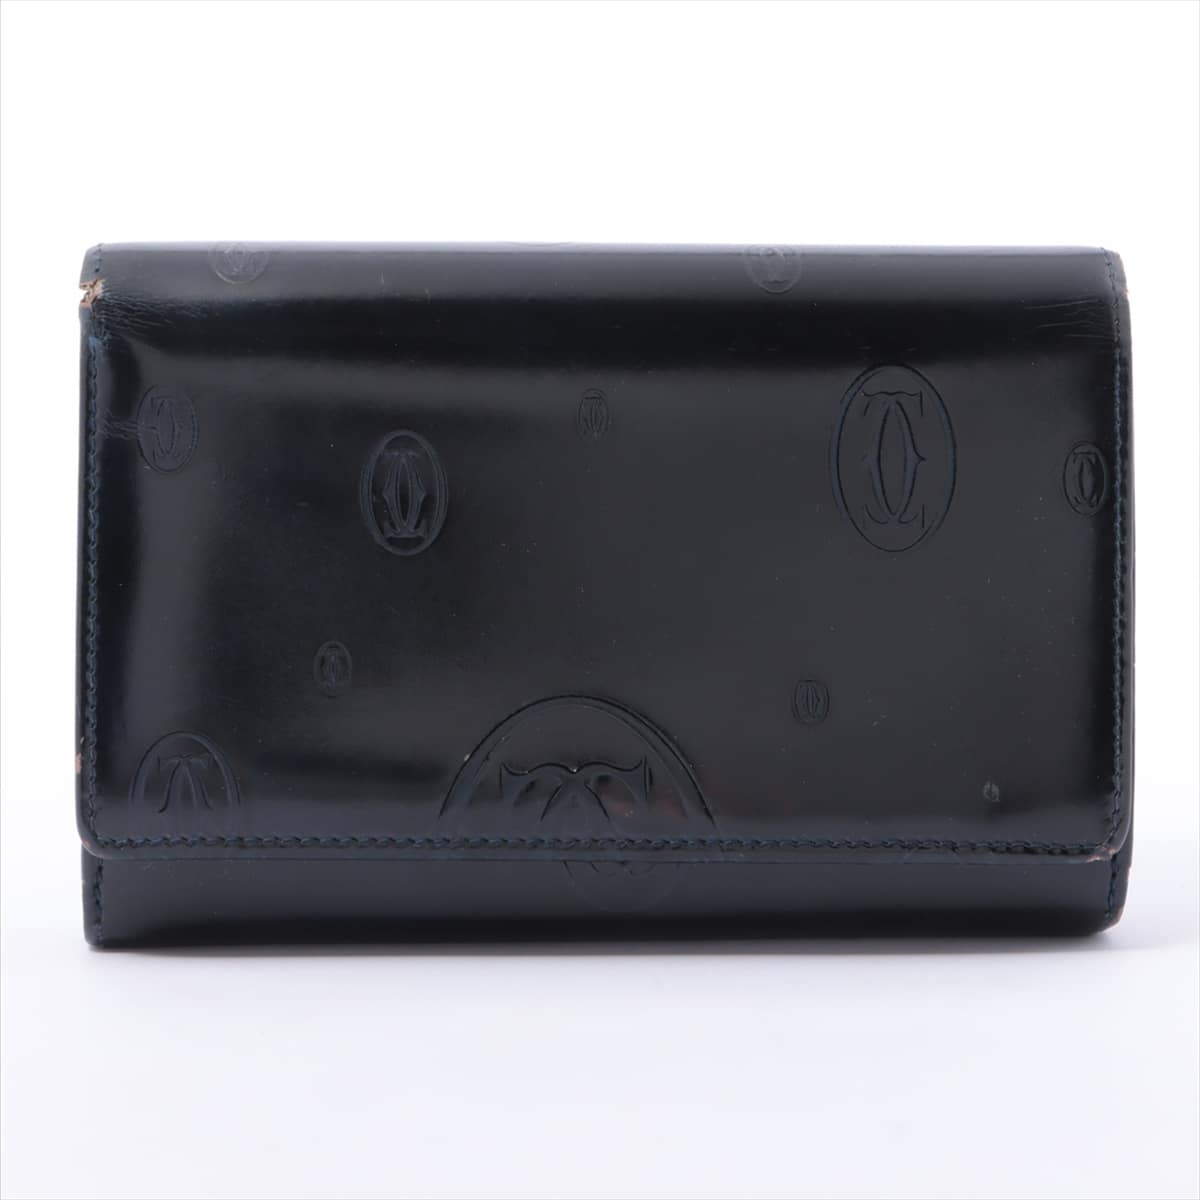 Cartier Happy Birthday Patent leather Wallet Black